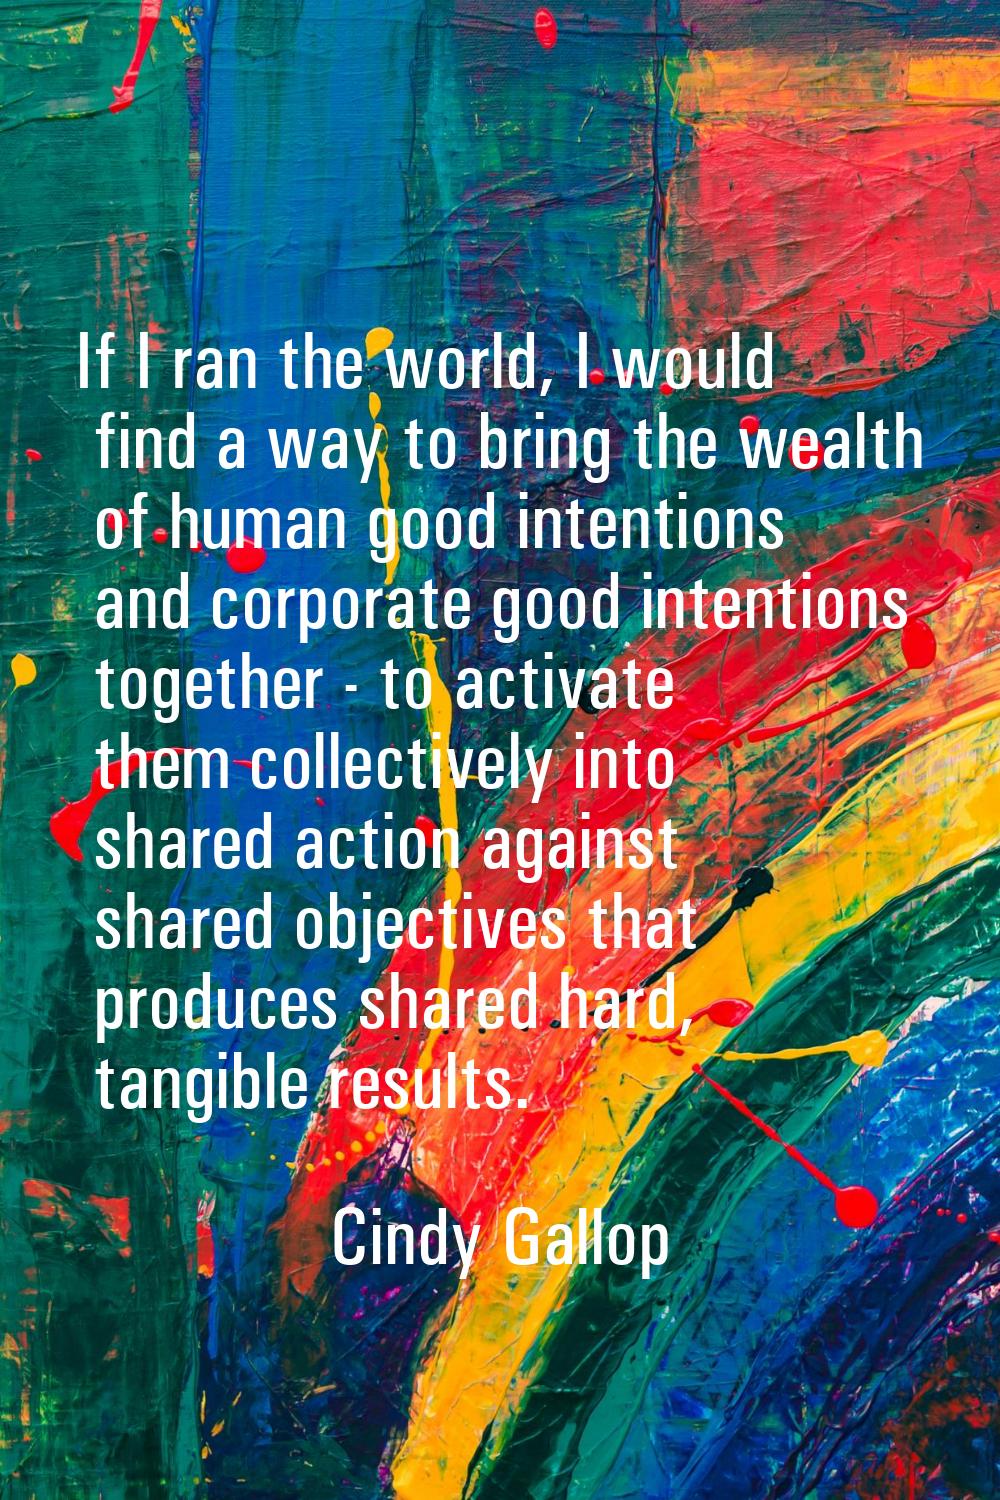 If I ran the world, I would find a way to bring the wealth of human good intentions and corporate g